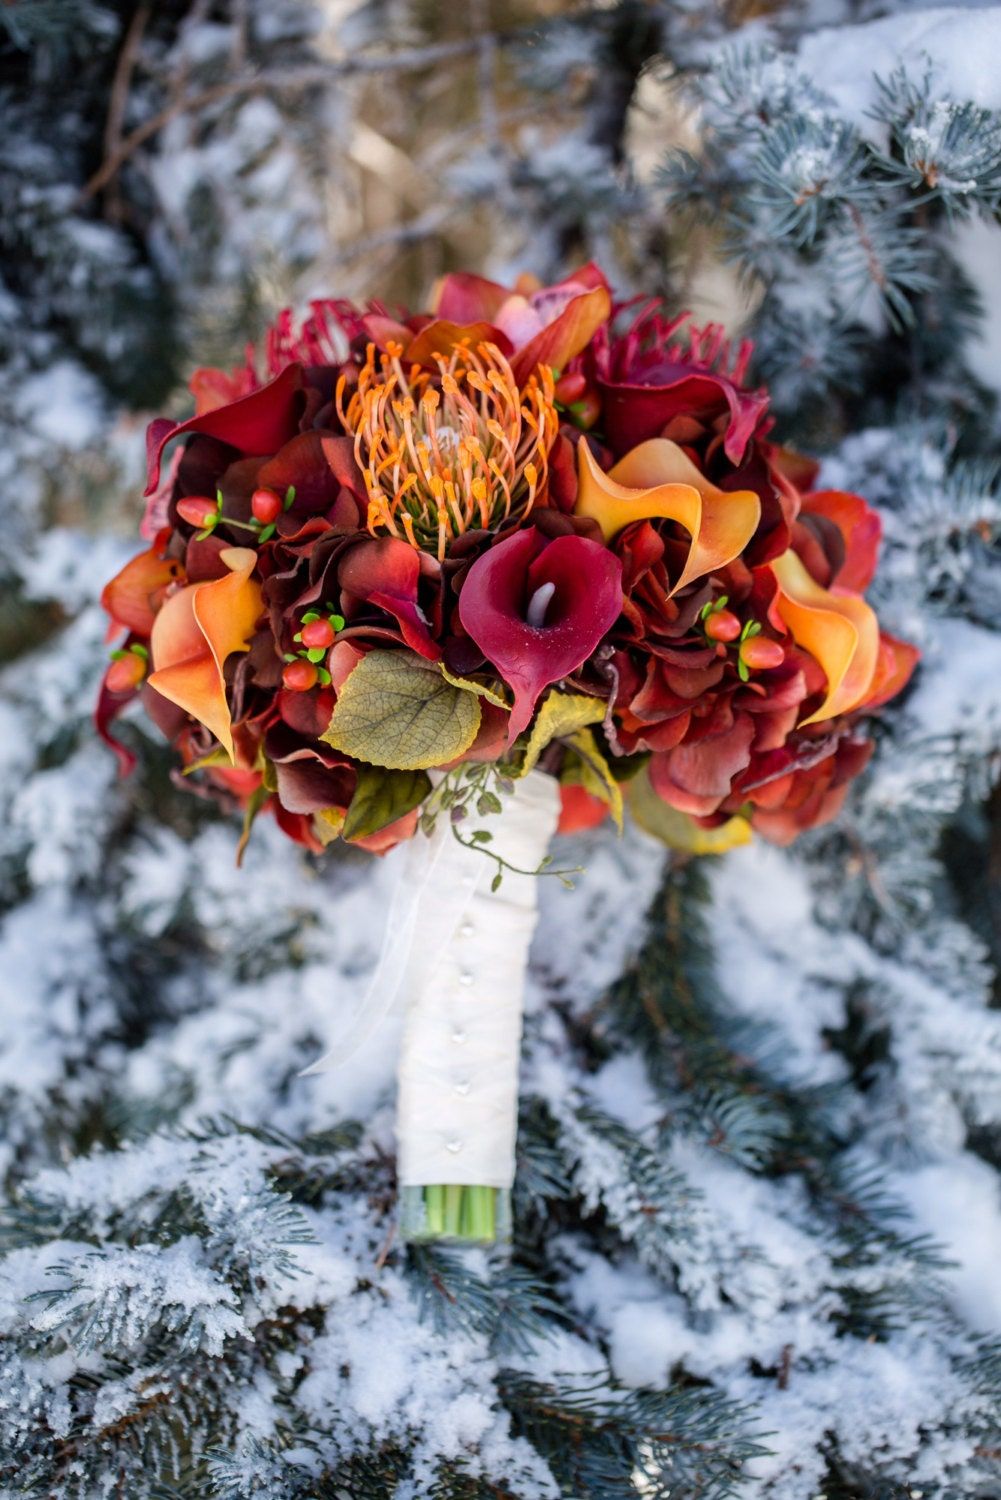 Fall wedding bouquet - Red and orange calla lily bouquet - Silk flowers